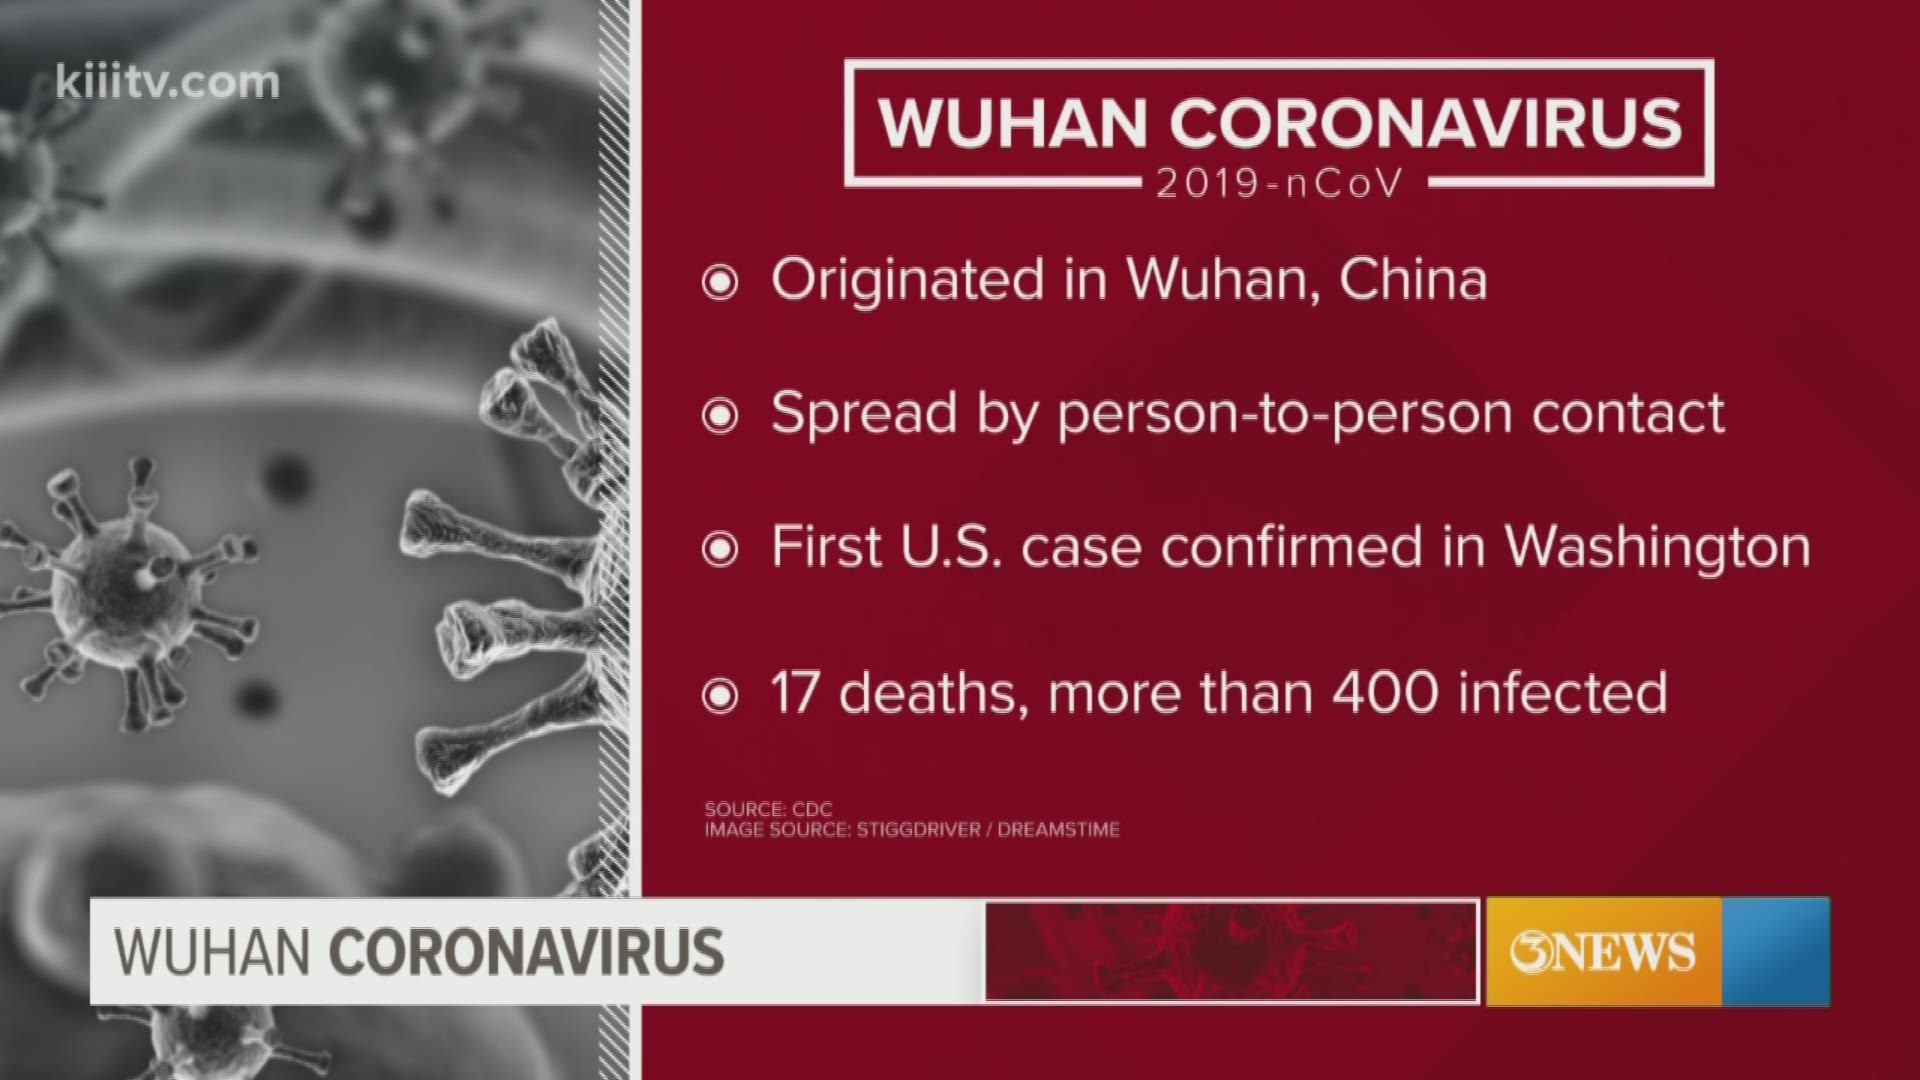 Dr. Salim Surani joined 3News First Edition with details on the Wuhan coronavirus in this edition of 3Star Health.